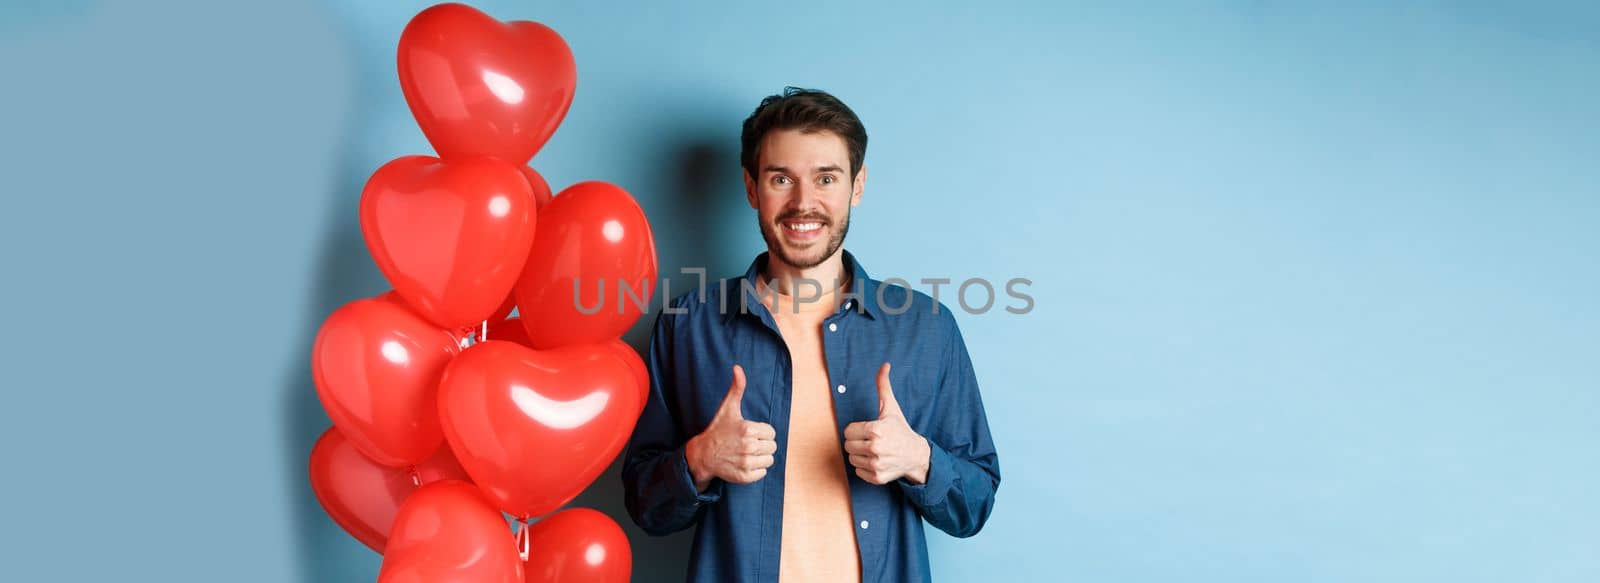 Happy valentines day. Cheerful boyfriend showing thumbs up in approval, standing with red hearts balloons for lover, blue background.